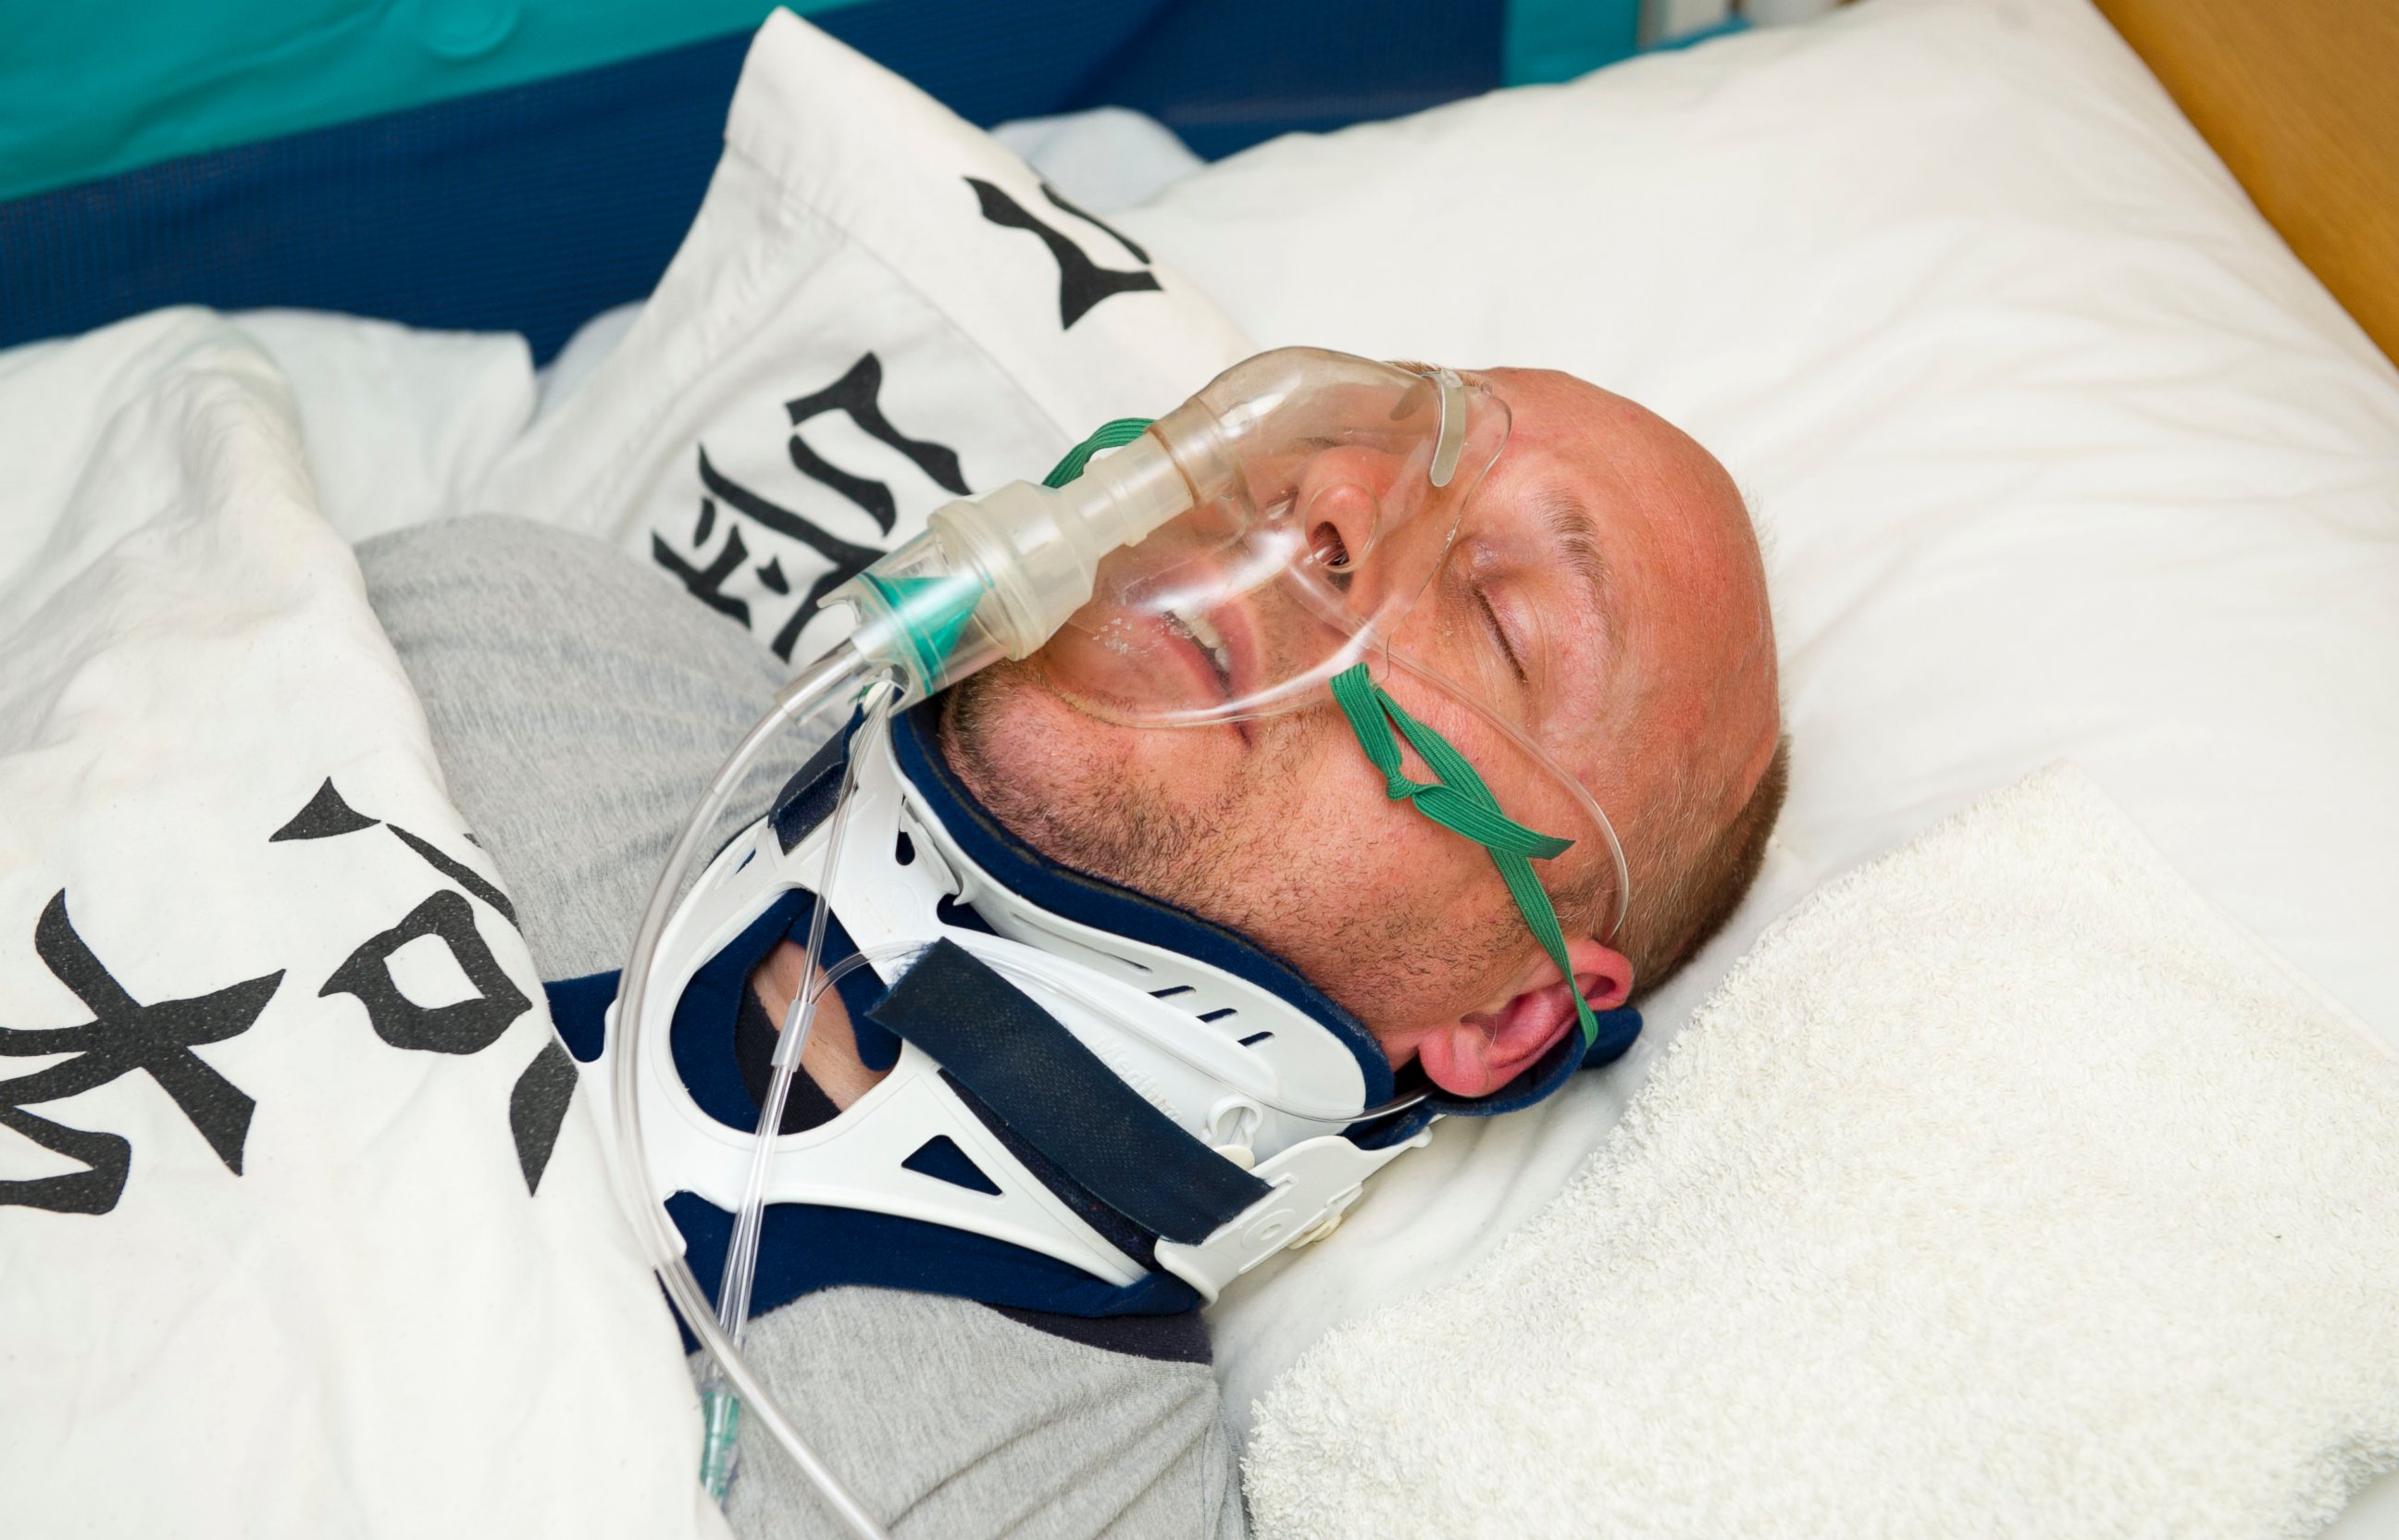 PHOTO: Alan Knight pretended he was in a vegetative state to scam his next door neighbor out of £40,000.